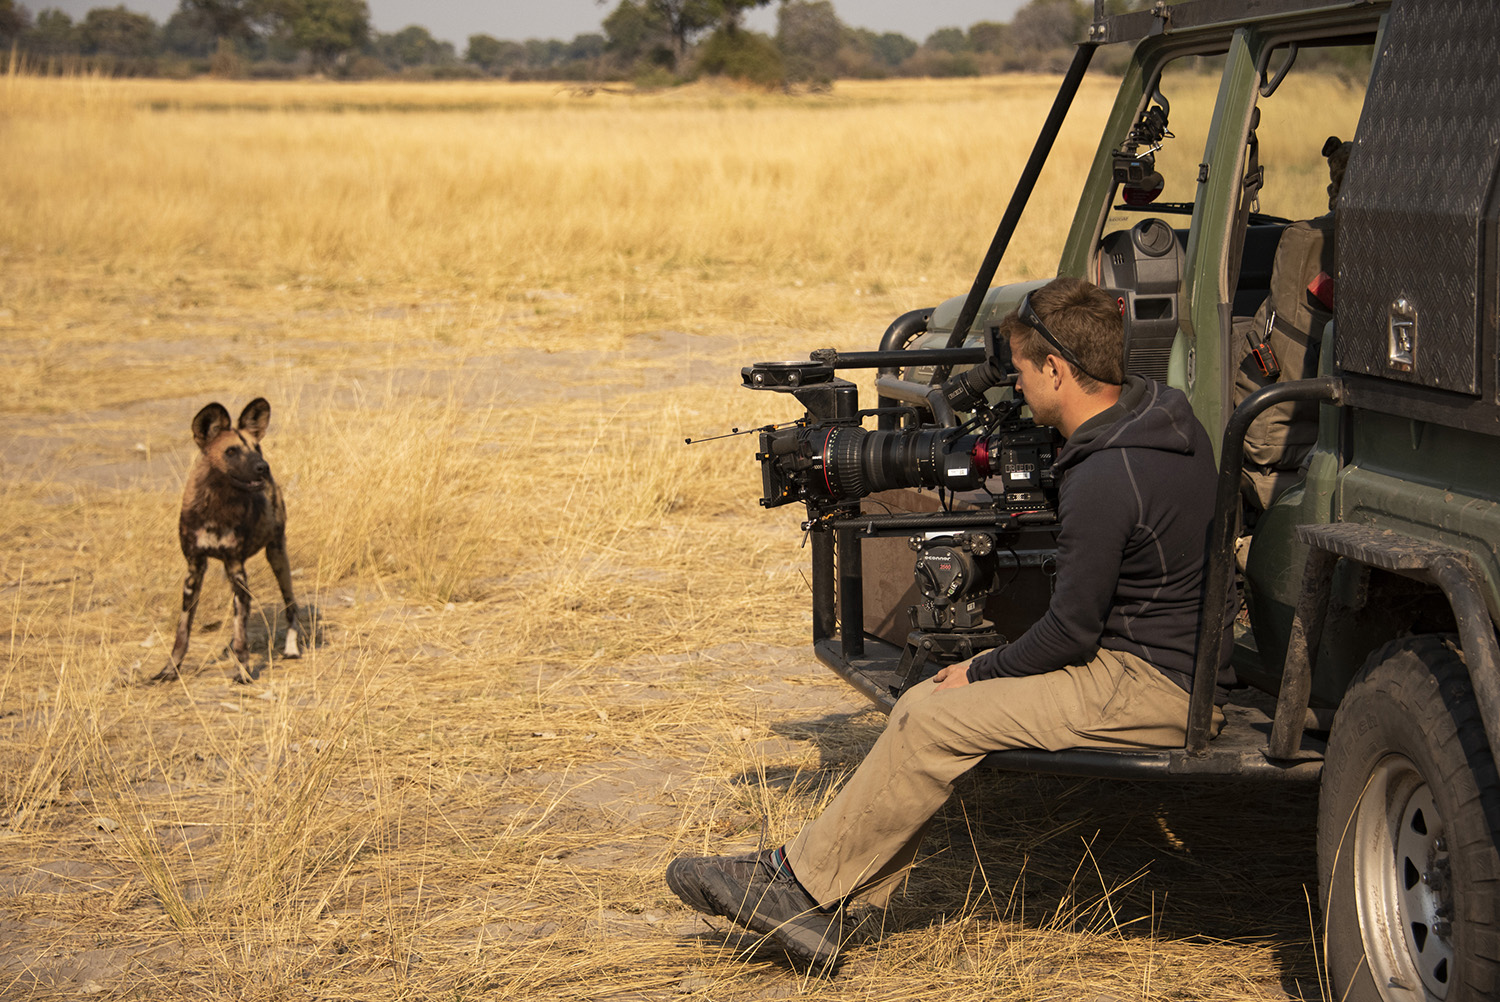 Bertie Gregory sitting on the side of the 4-wheel drive, filming a Wild dog looking at him.